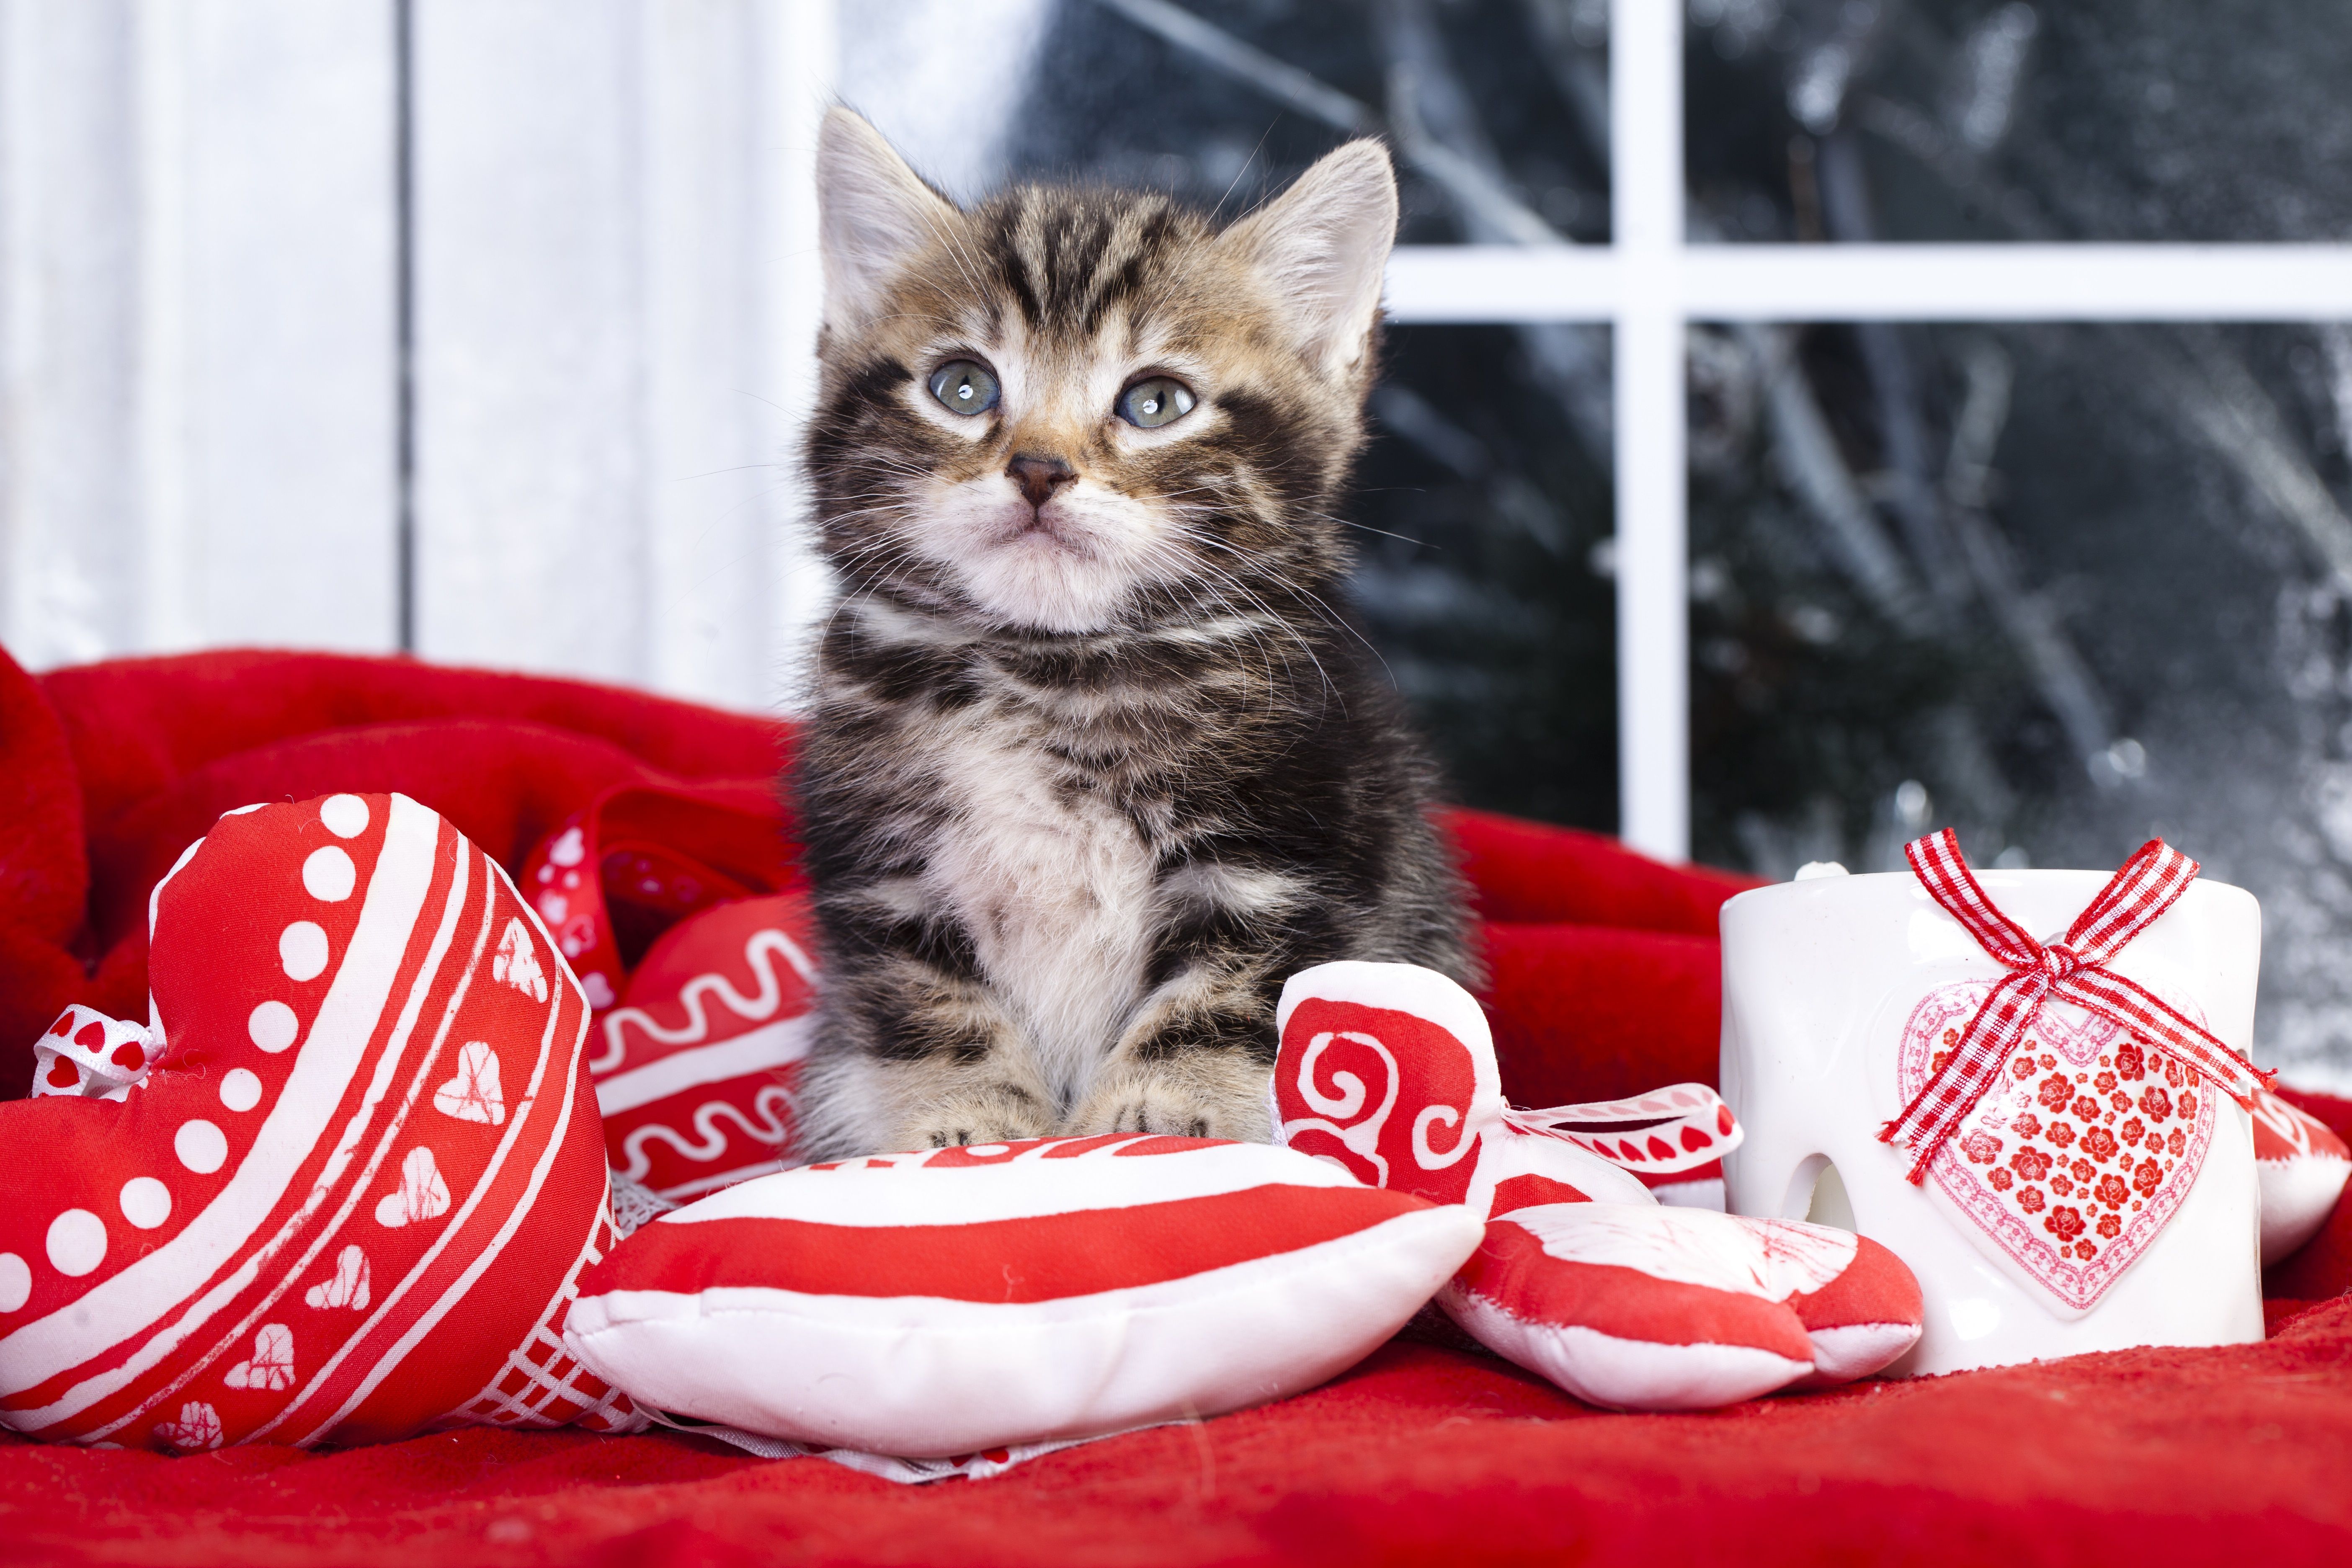 Cats Who Want To Be Your Valentine This Valentine's Day [PICTURES]. Cat care, Your pet, Cats